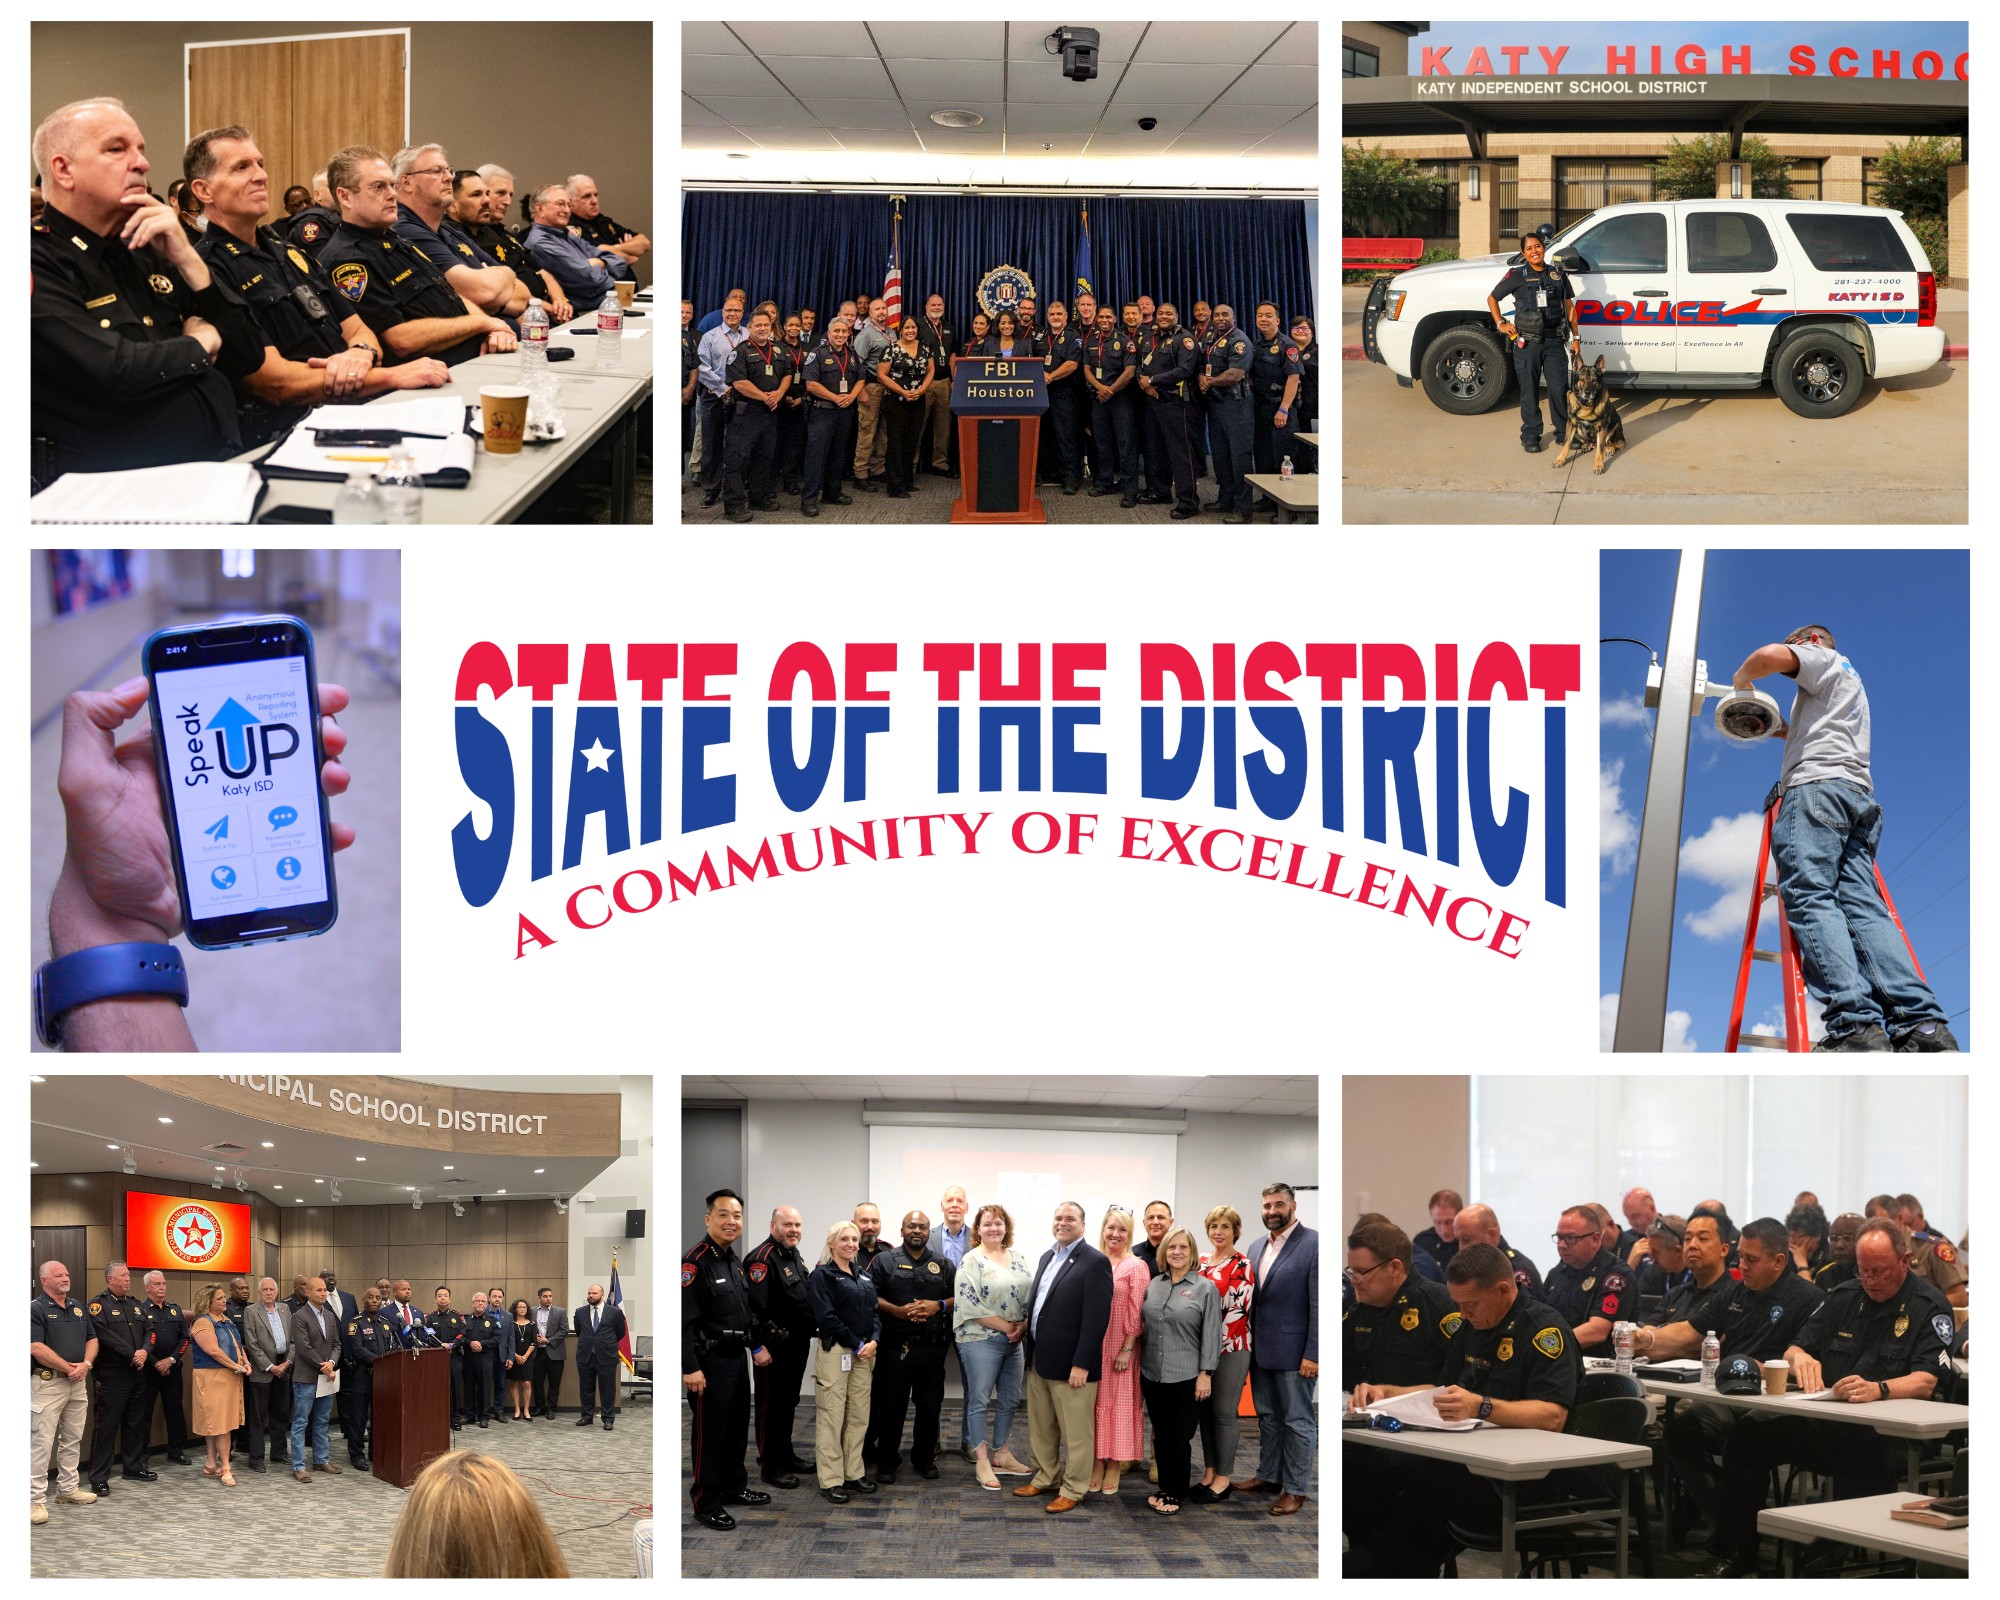 Katy ISD State of the District Emphasizes a Community of Excellence